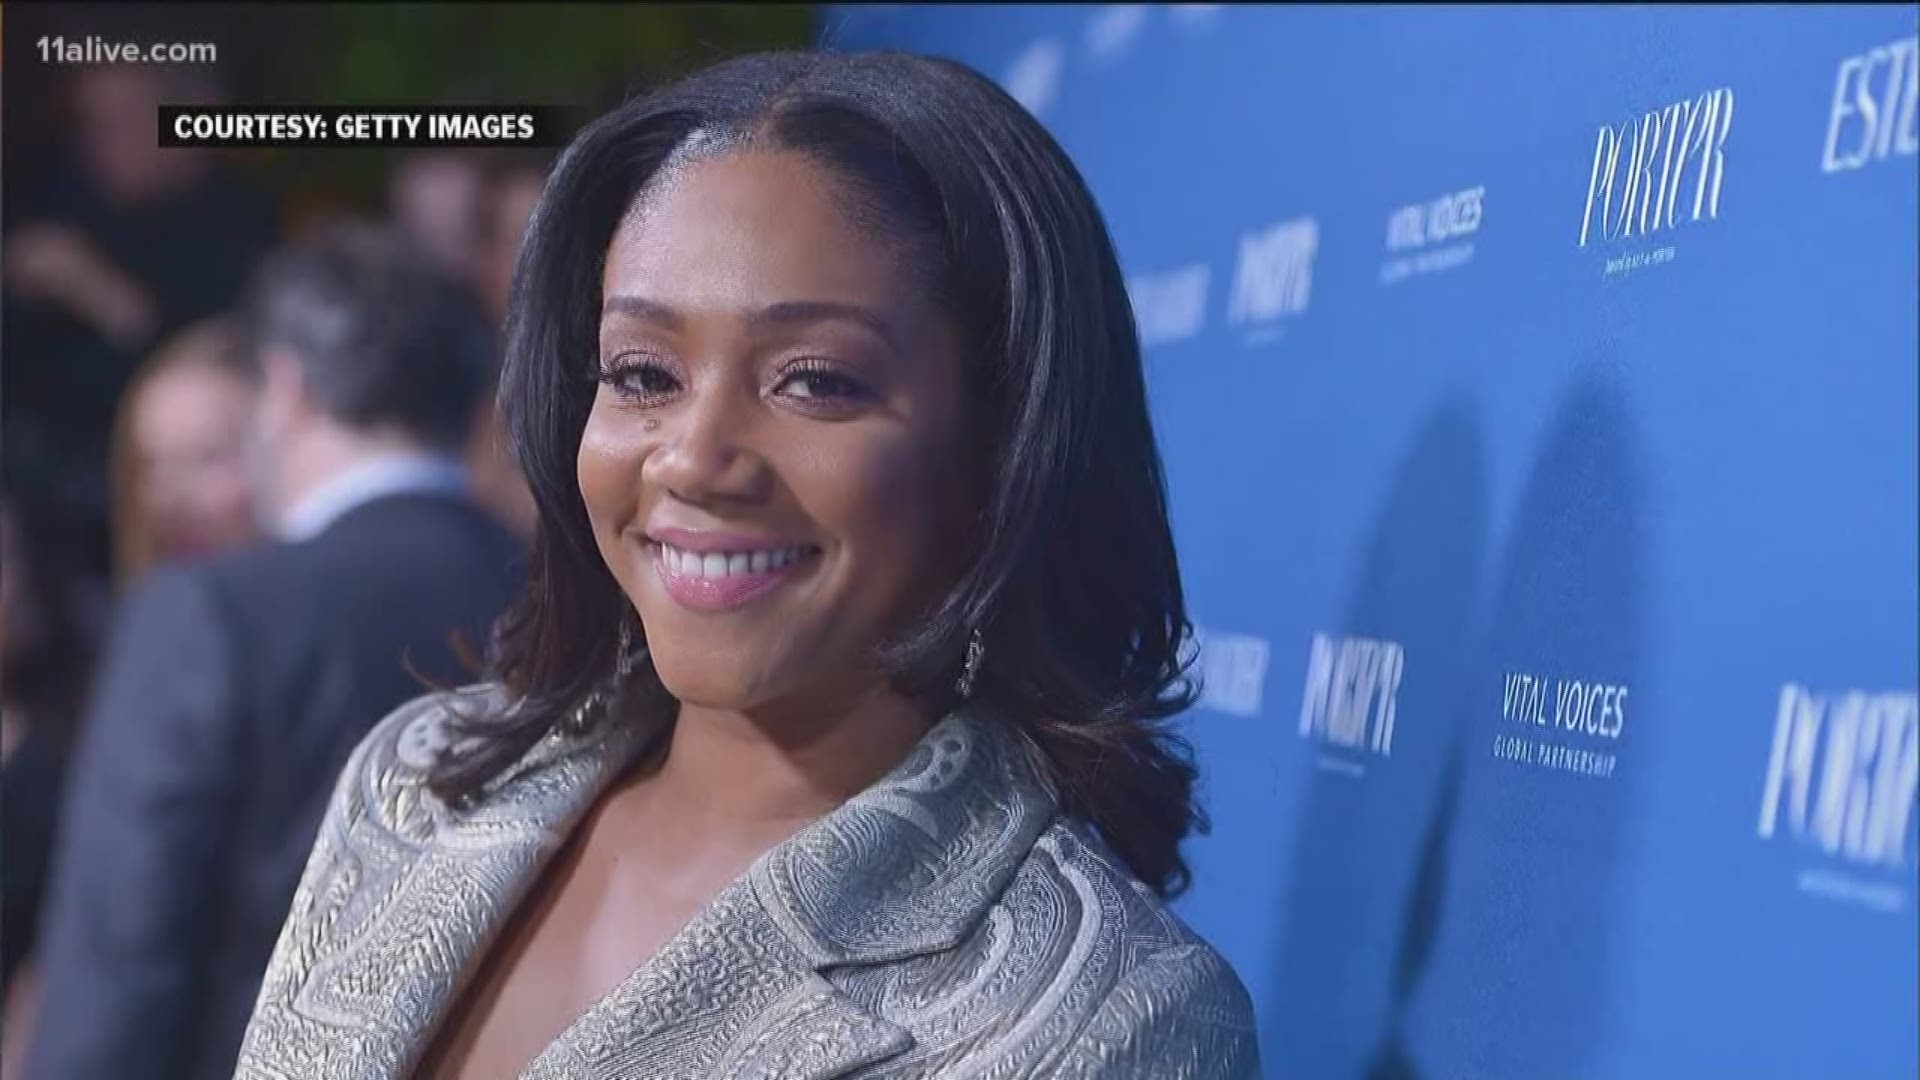 Tiffany Haddish will begin shooting 'Limited Partners' in Atlanta, which will be released in 2019.